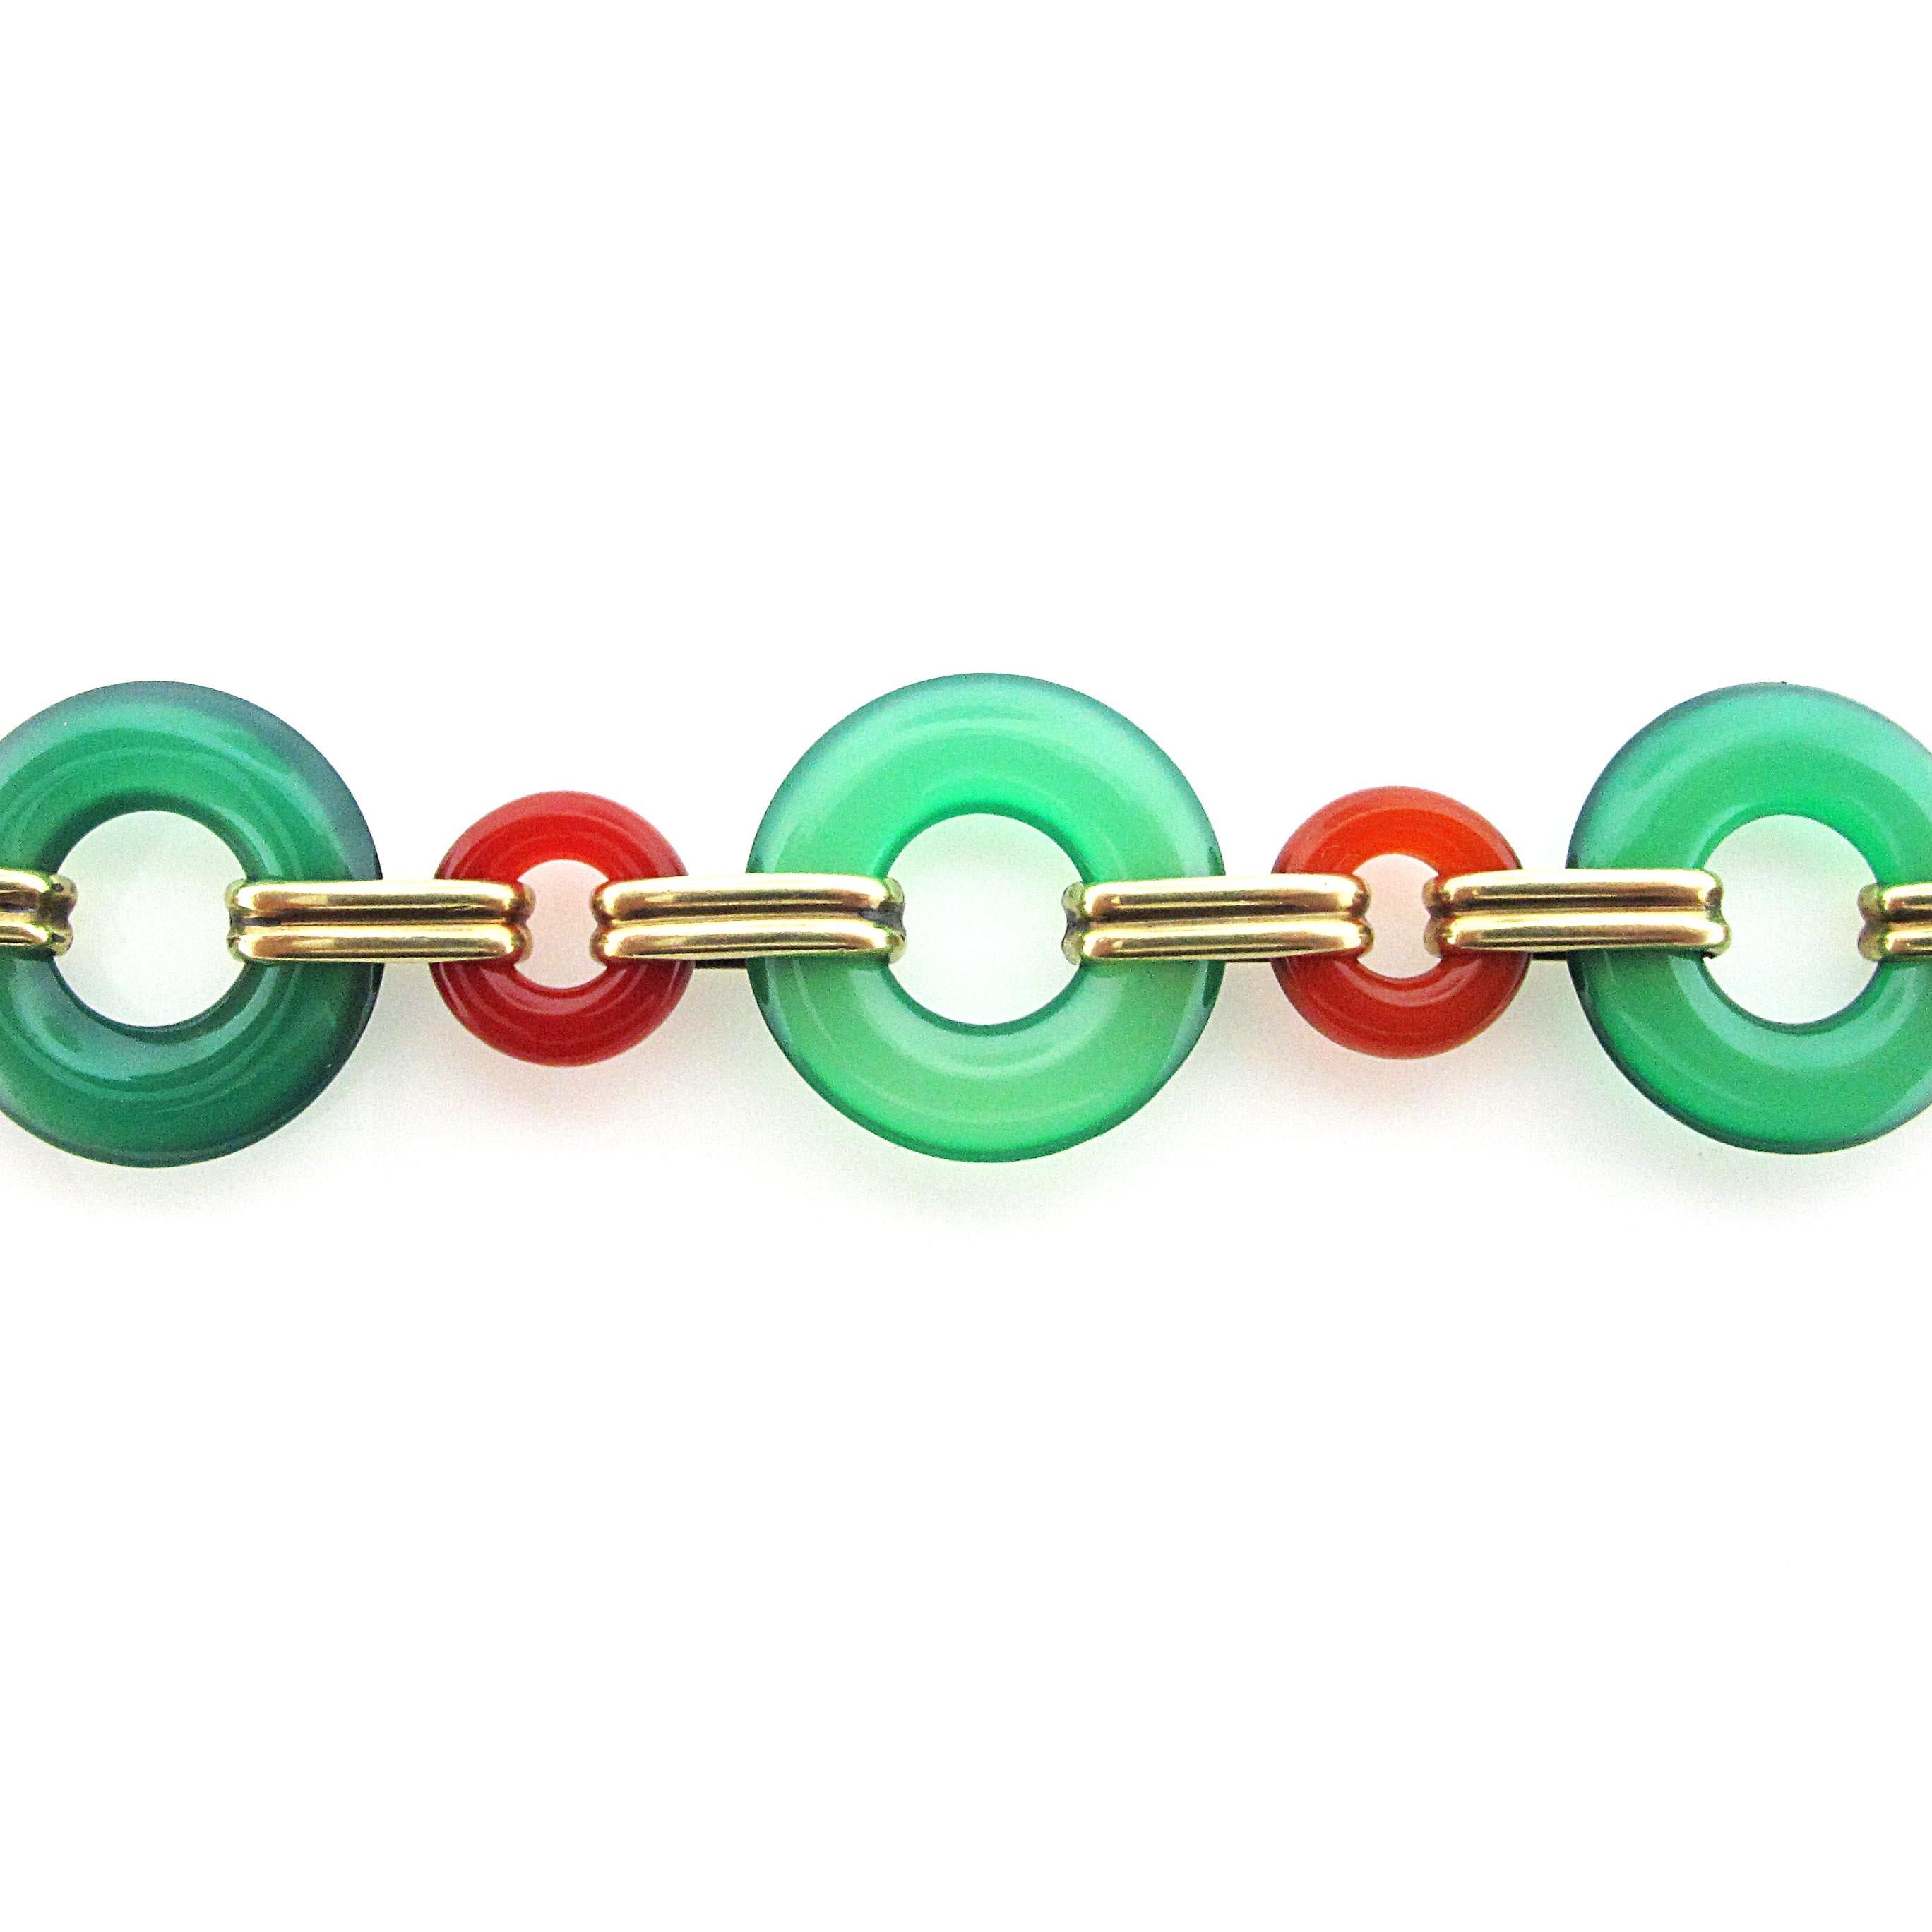 Fashion forward, retro link green onyx bracelet. The bracelet has great movement and is very comfortable to wear. The links are held together by 14 karat yellow gold.
The bracelet is 7 inches in length